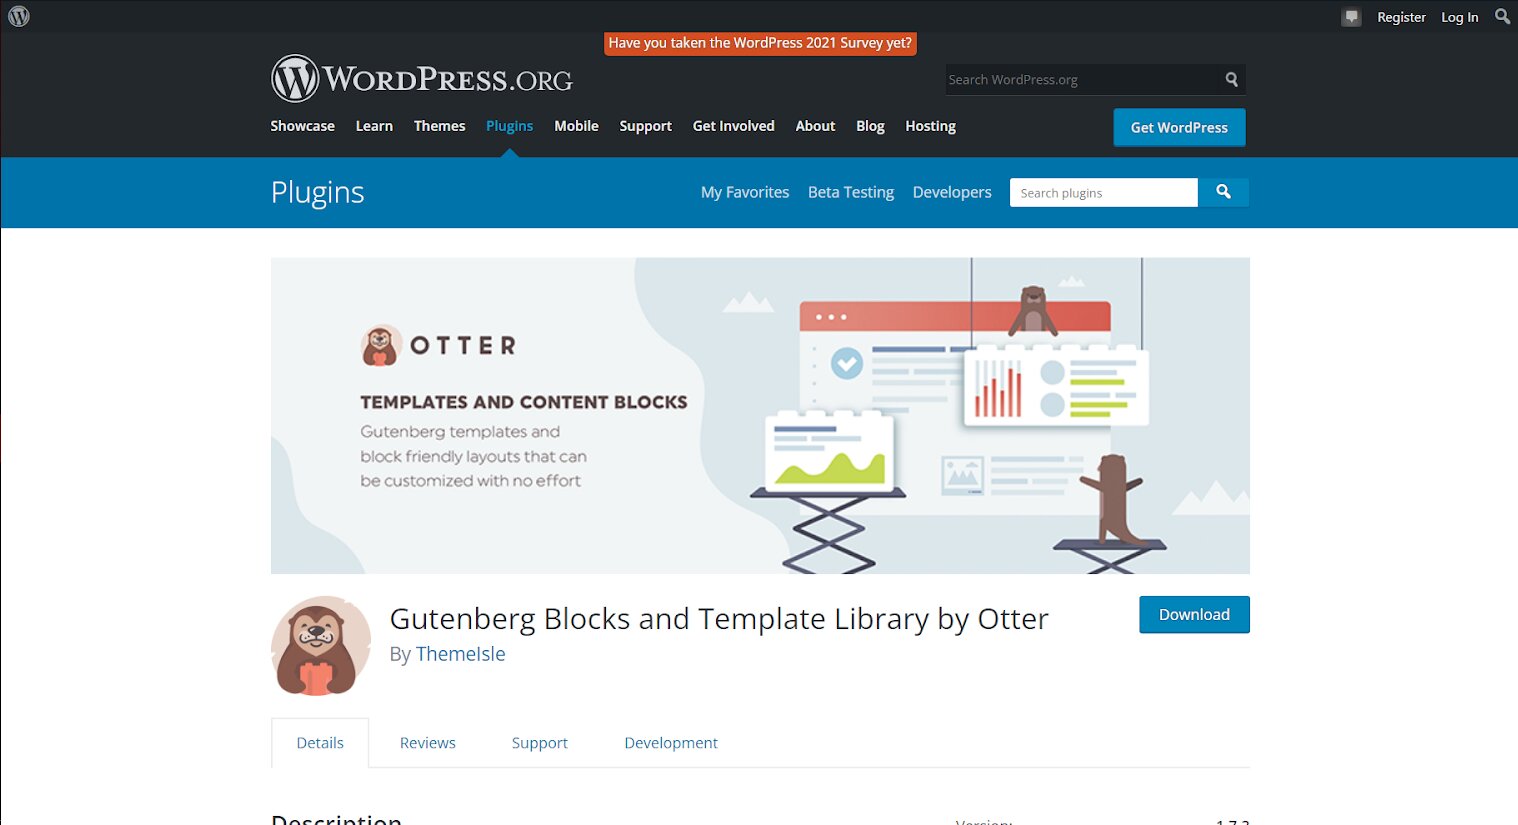 Otter Blocks and Template Library